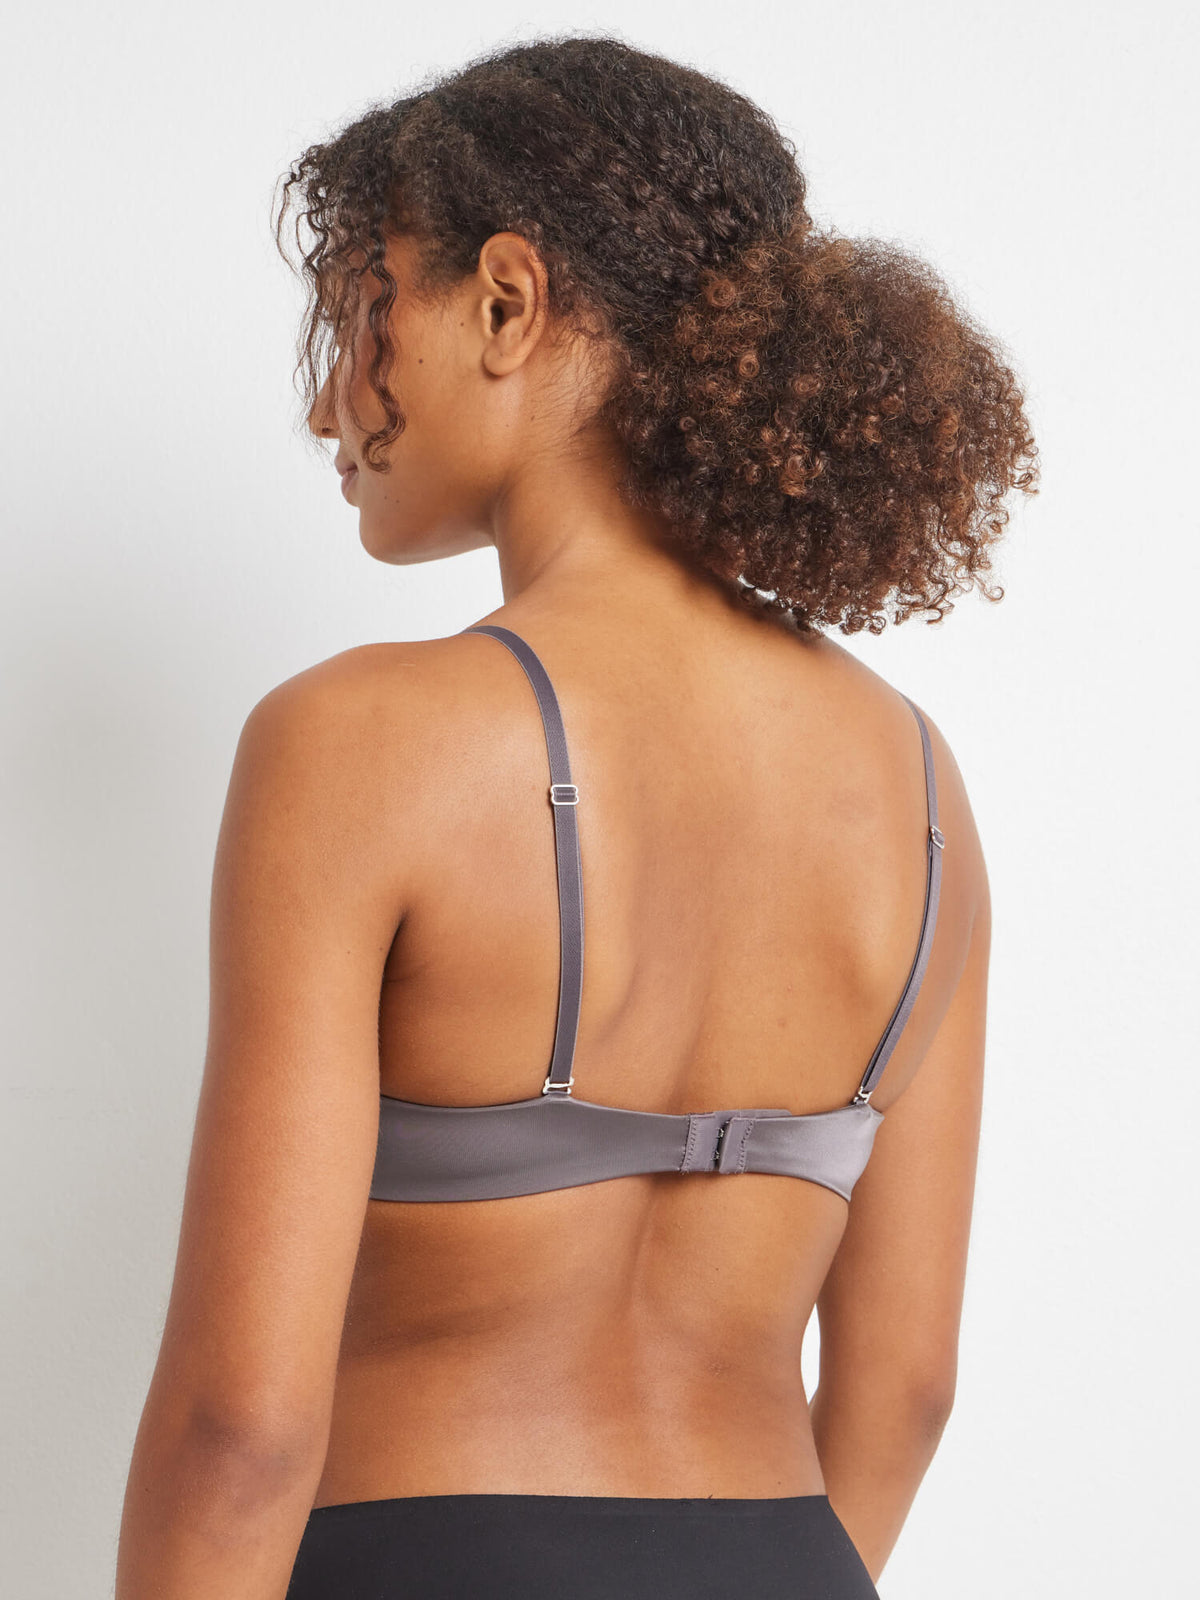 Total Comfort Contour Push Up Bra in Charcoal by Kayser Lingerie